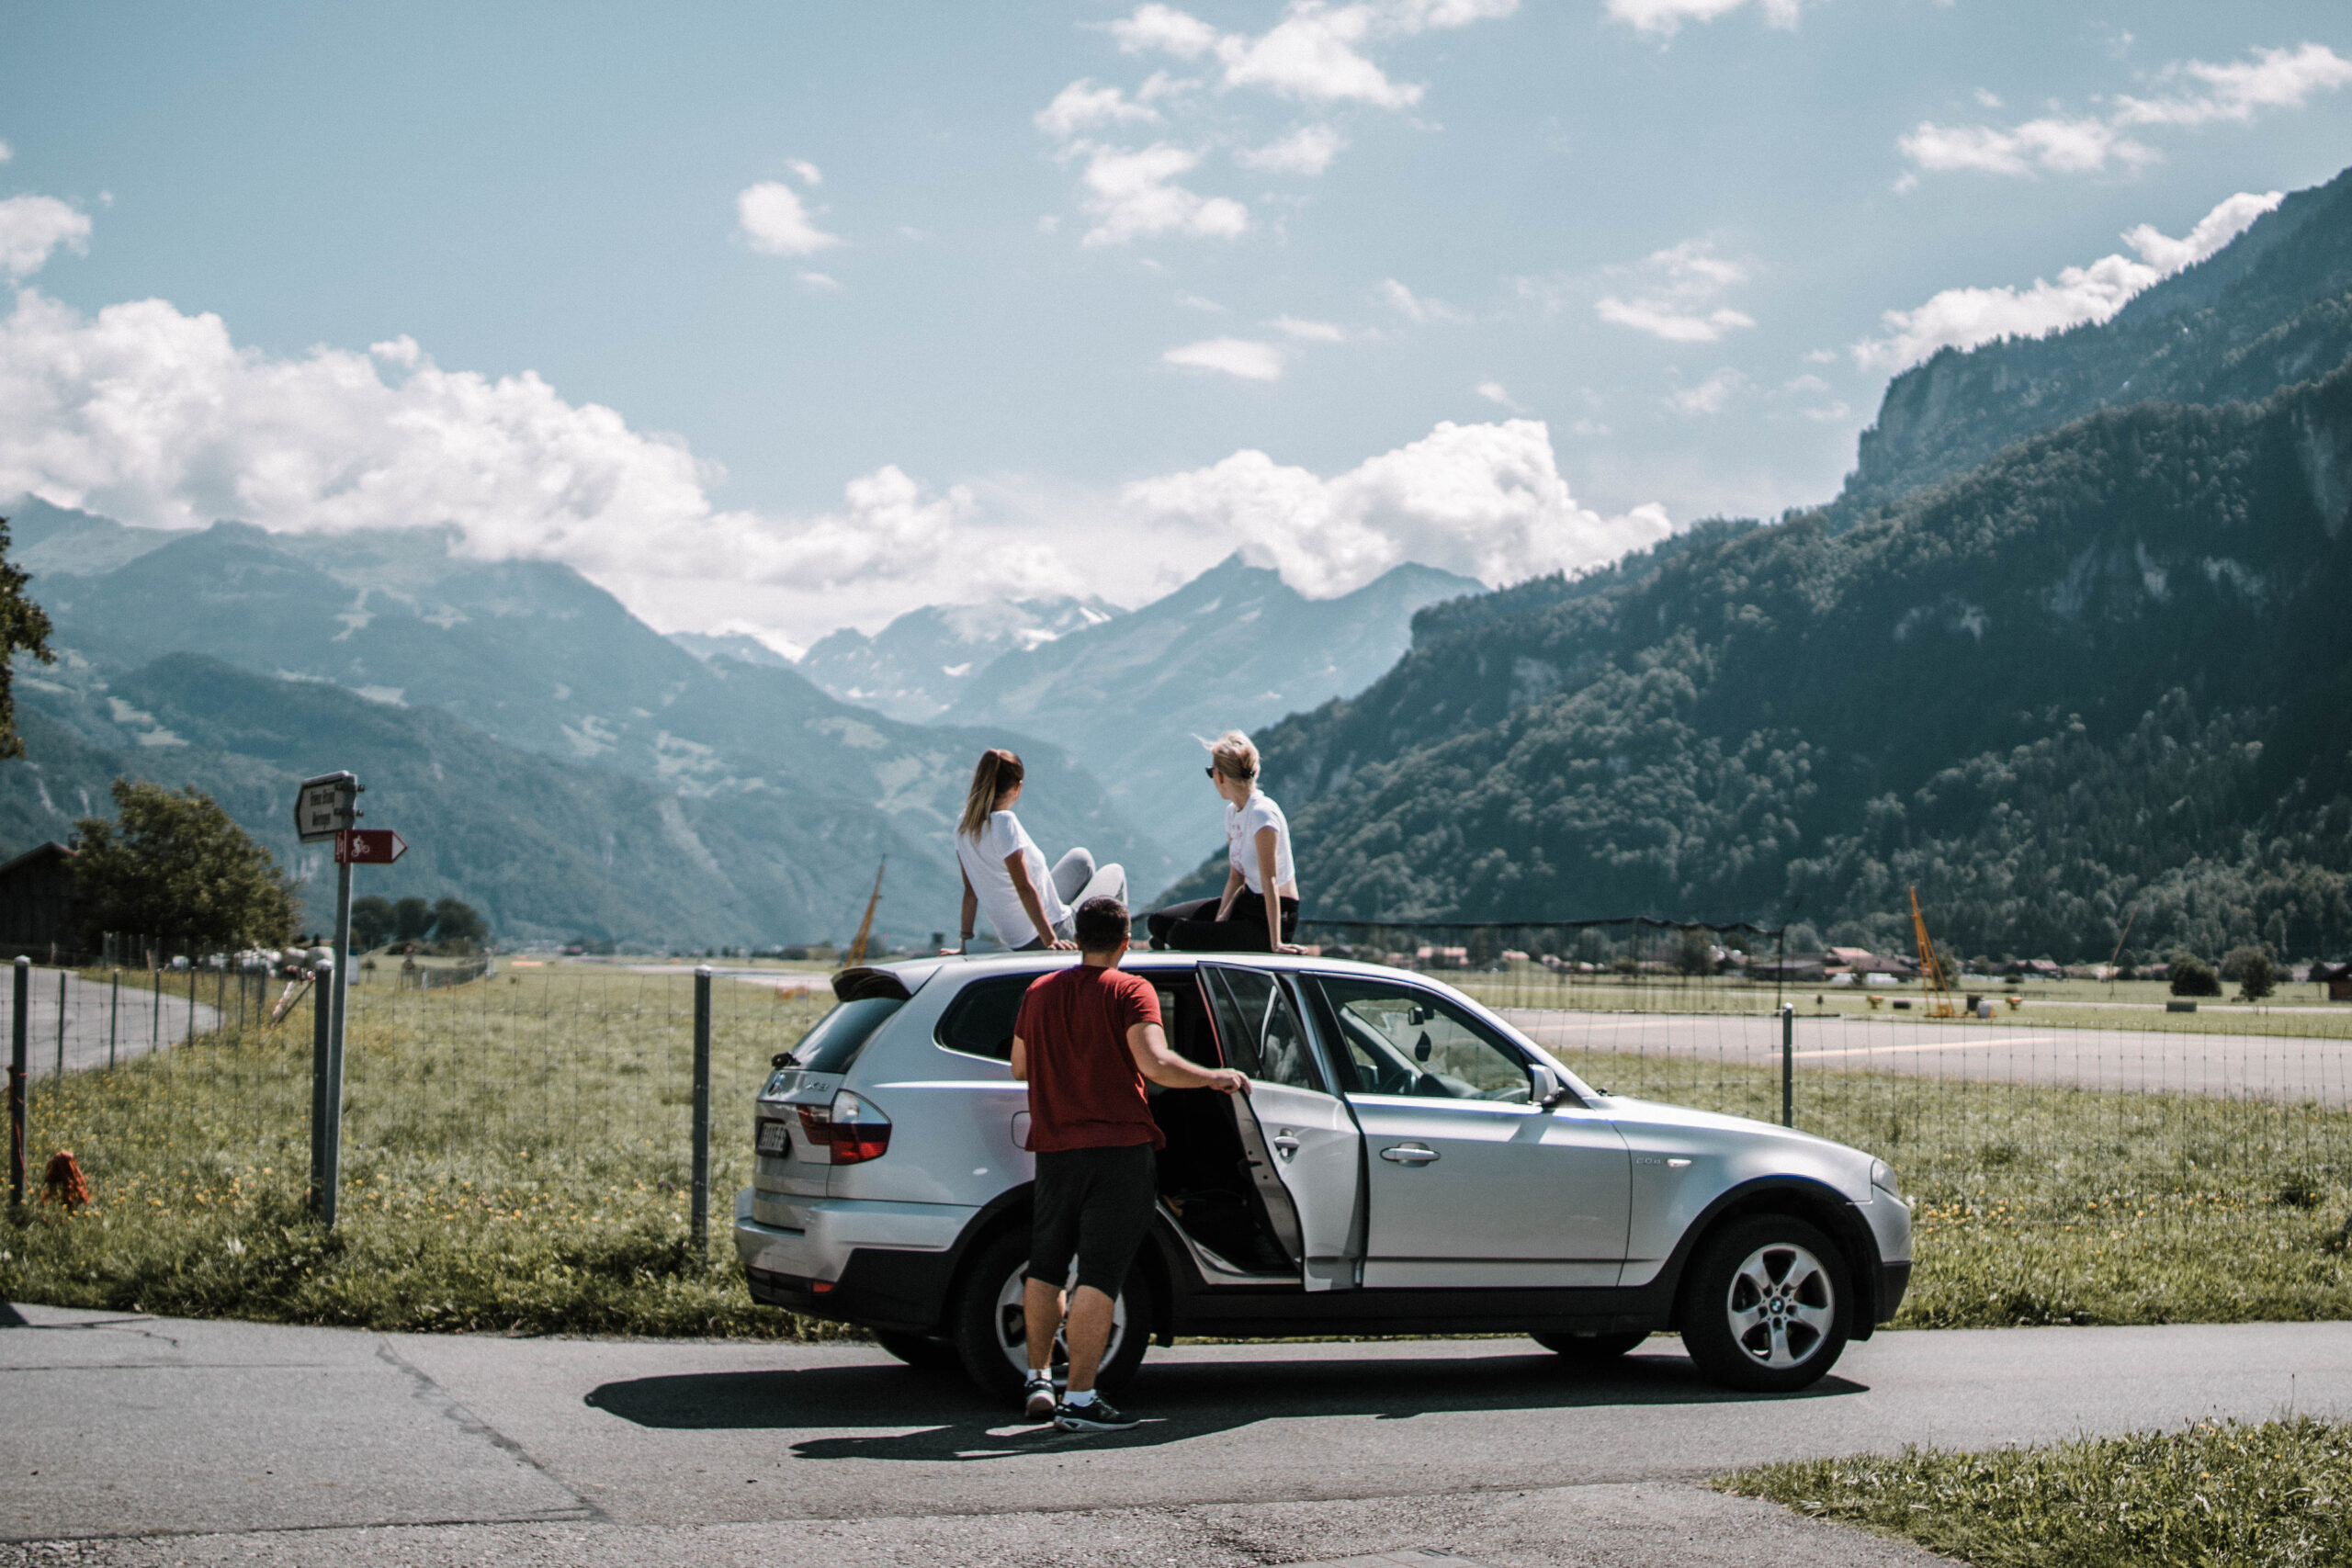 Family SUV in front of mountains